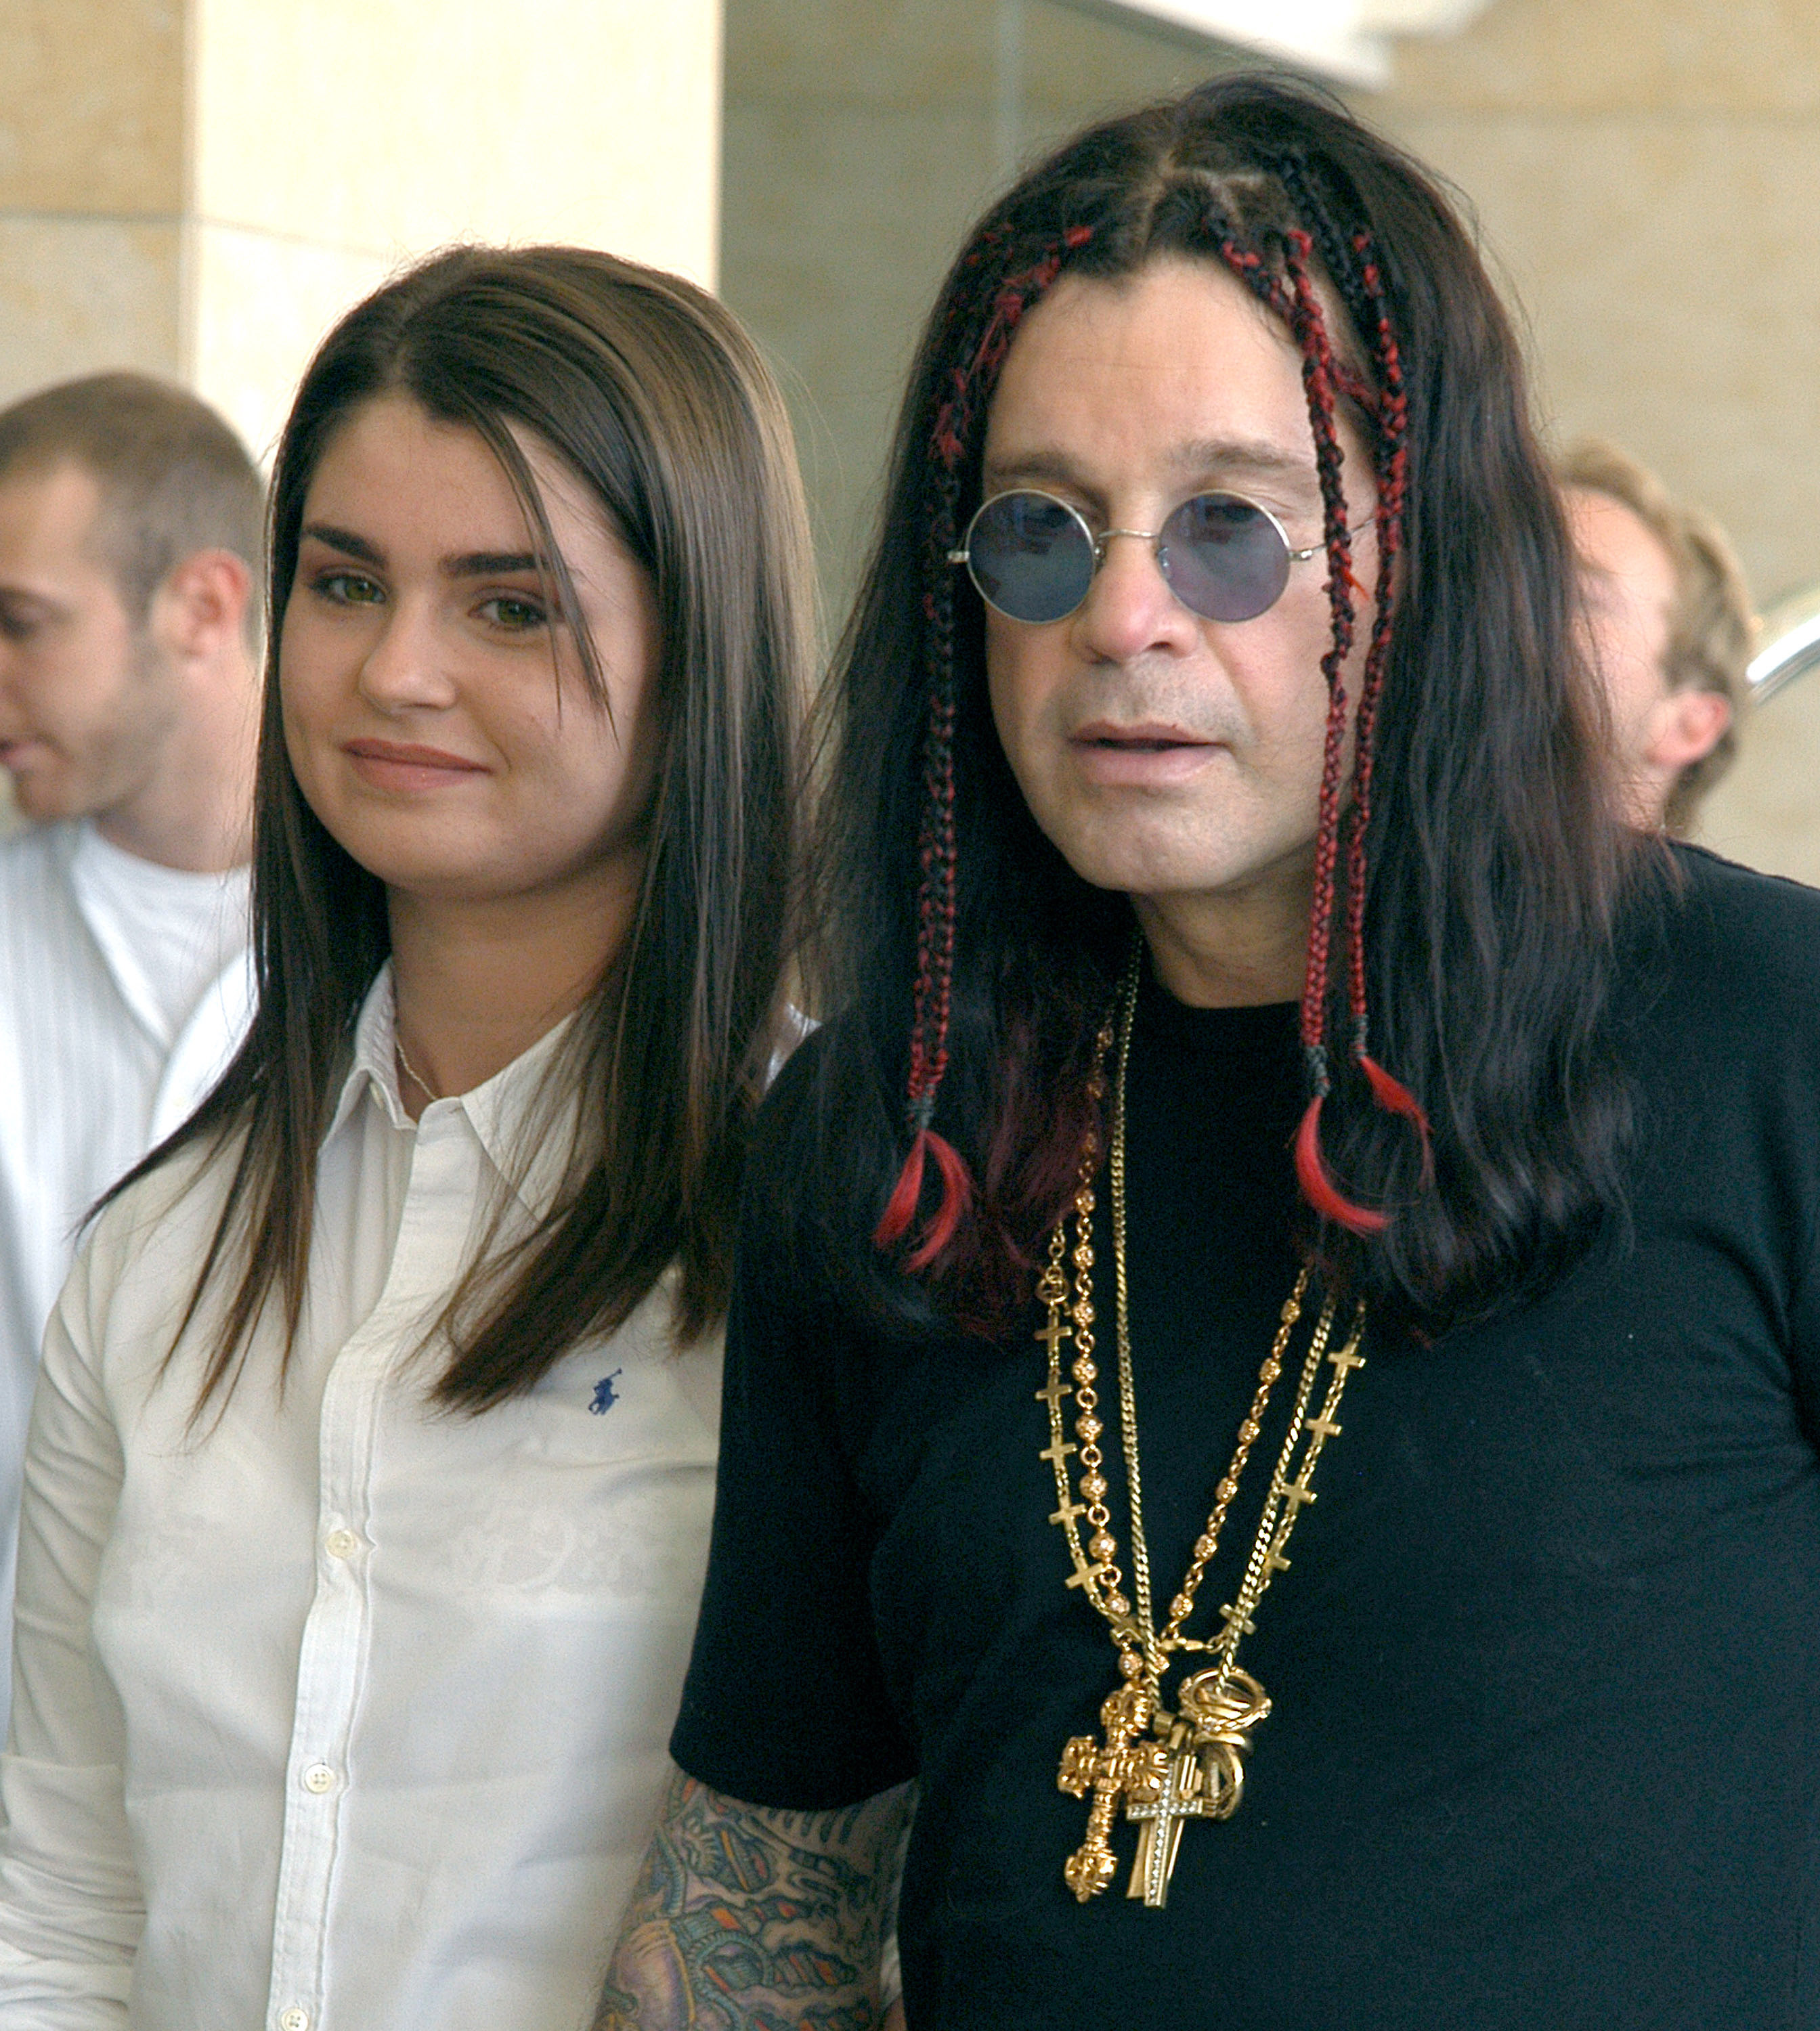 Aimee and Ozzy Osbourne on day 1 of the TCA July 2003 Cable Press Tour in Hollywood, California in 2003. | Source: Getty Images